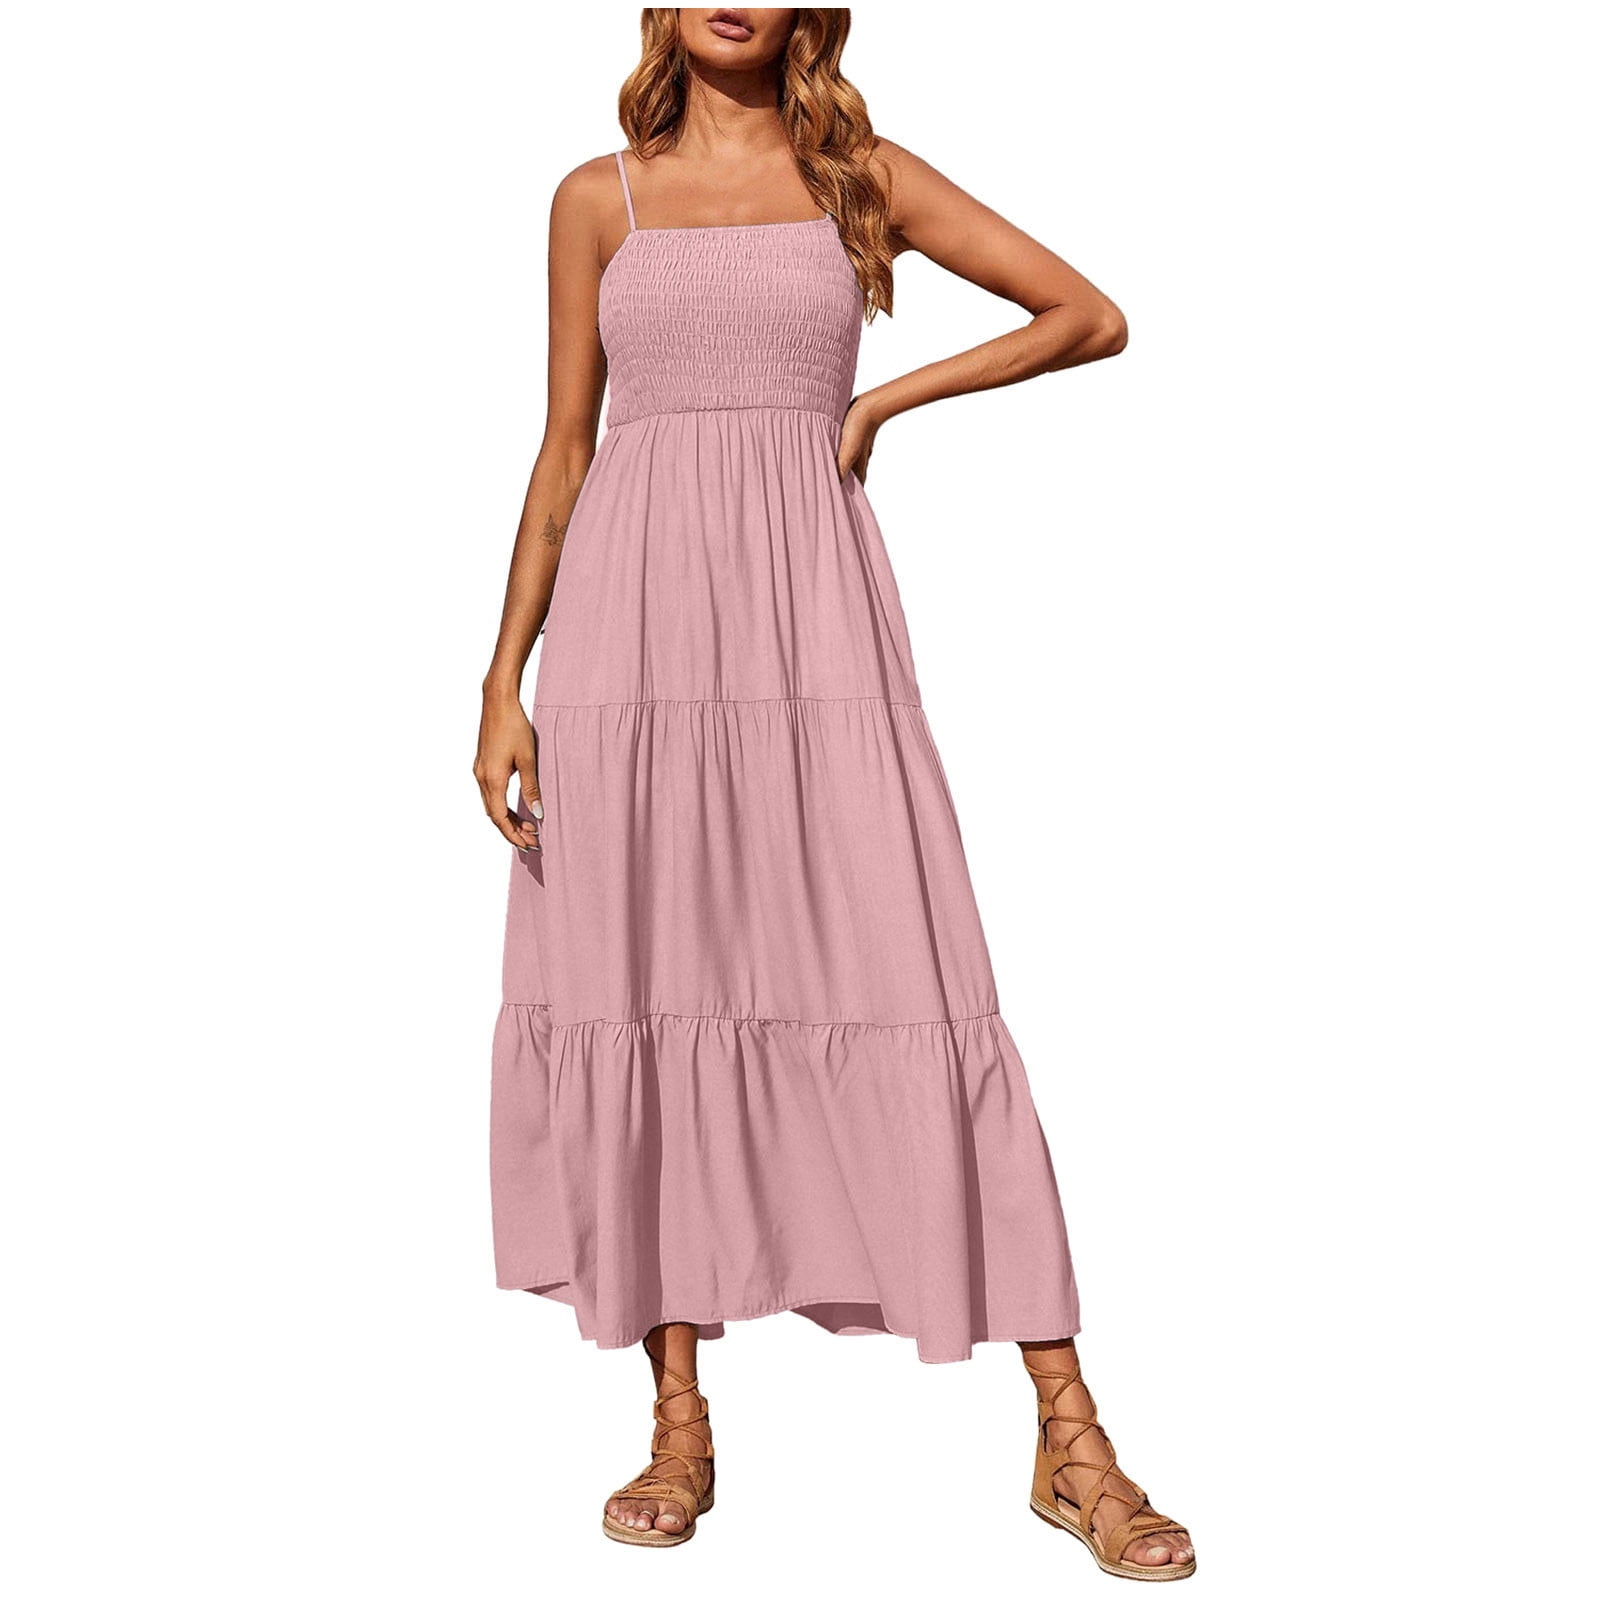 Wenini Long Maxi Dress for Women, Summer Sun Dresses with Pockets Spaghetti Strap Sleeveless Floral Casual Wedding Guest Dresses #Flash Sales Today